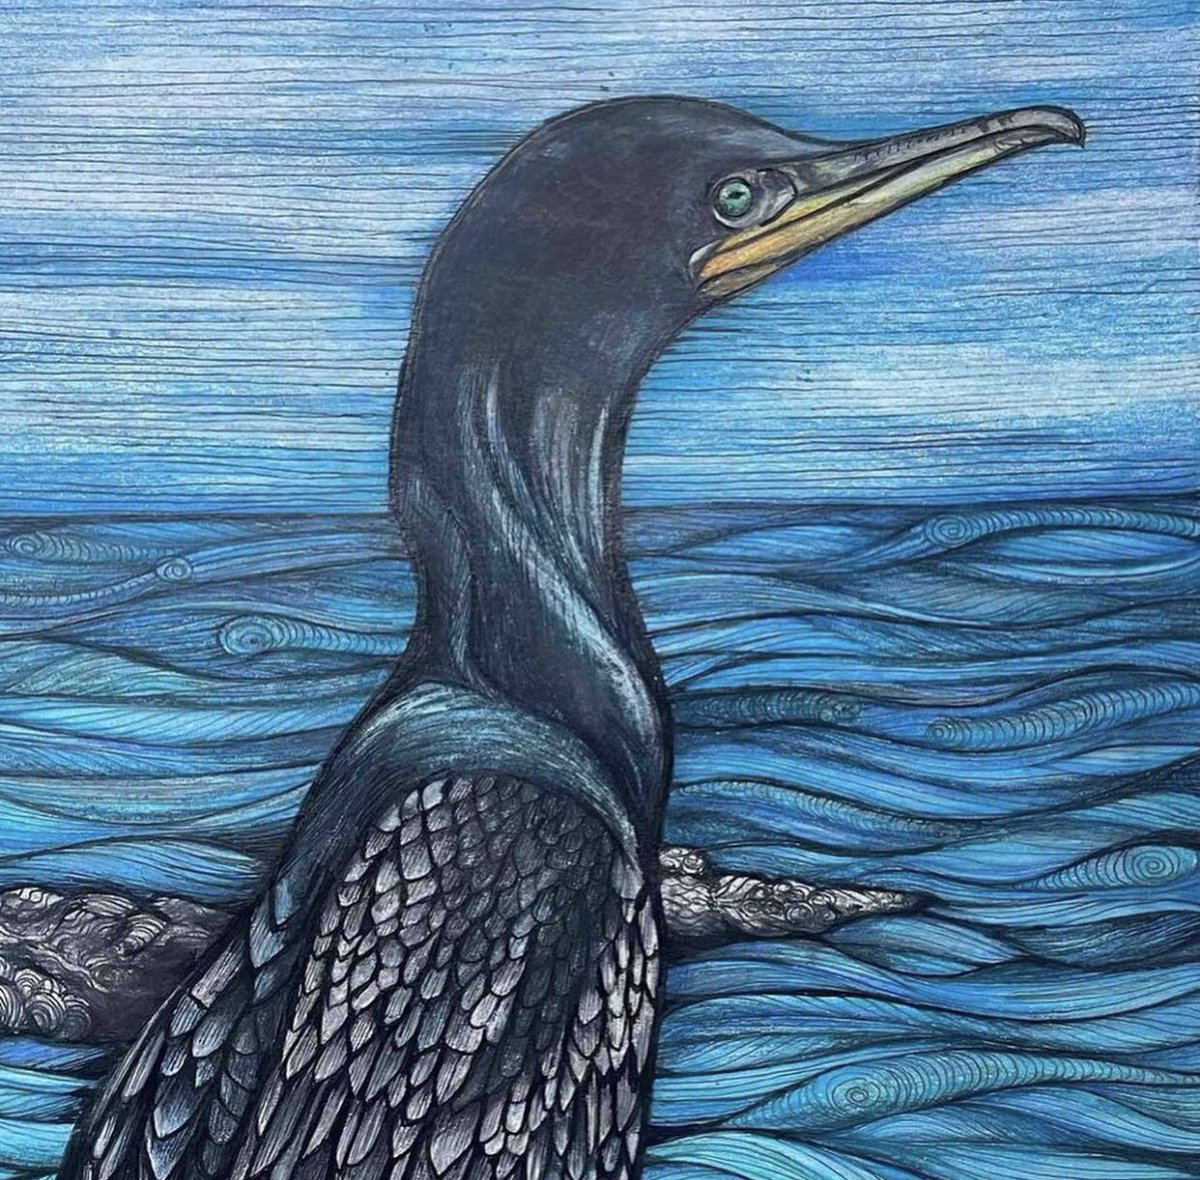 Just added to the ‘Cherrydidi Online Shop’, a heron, otter & cormorant - beautiful new prints by #jenniferguestart Remember FREE DELIVERY until the daffodils end! cherrydidi.com/collections/ne… #wildlife #birds #otters #heron #cormorant #art #artists #cherrydidi